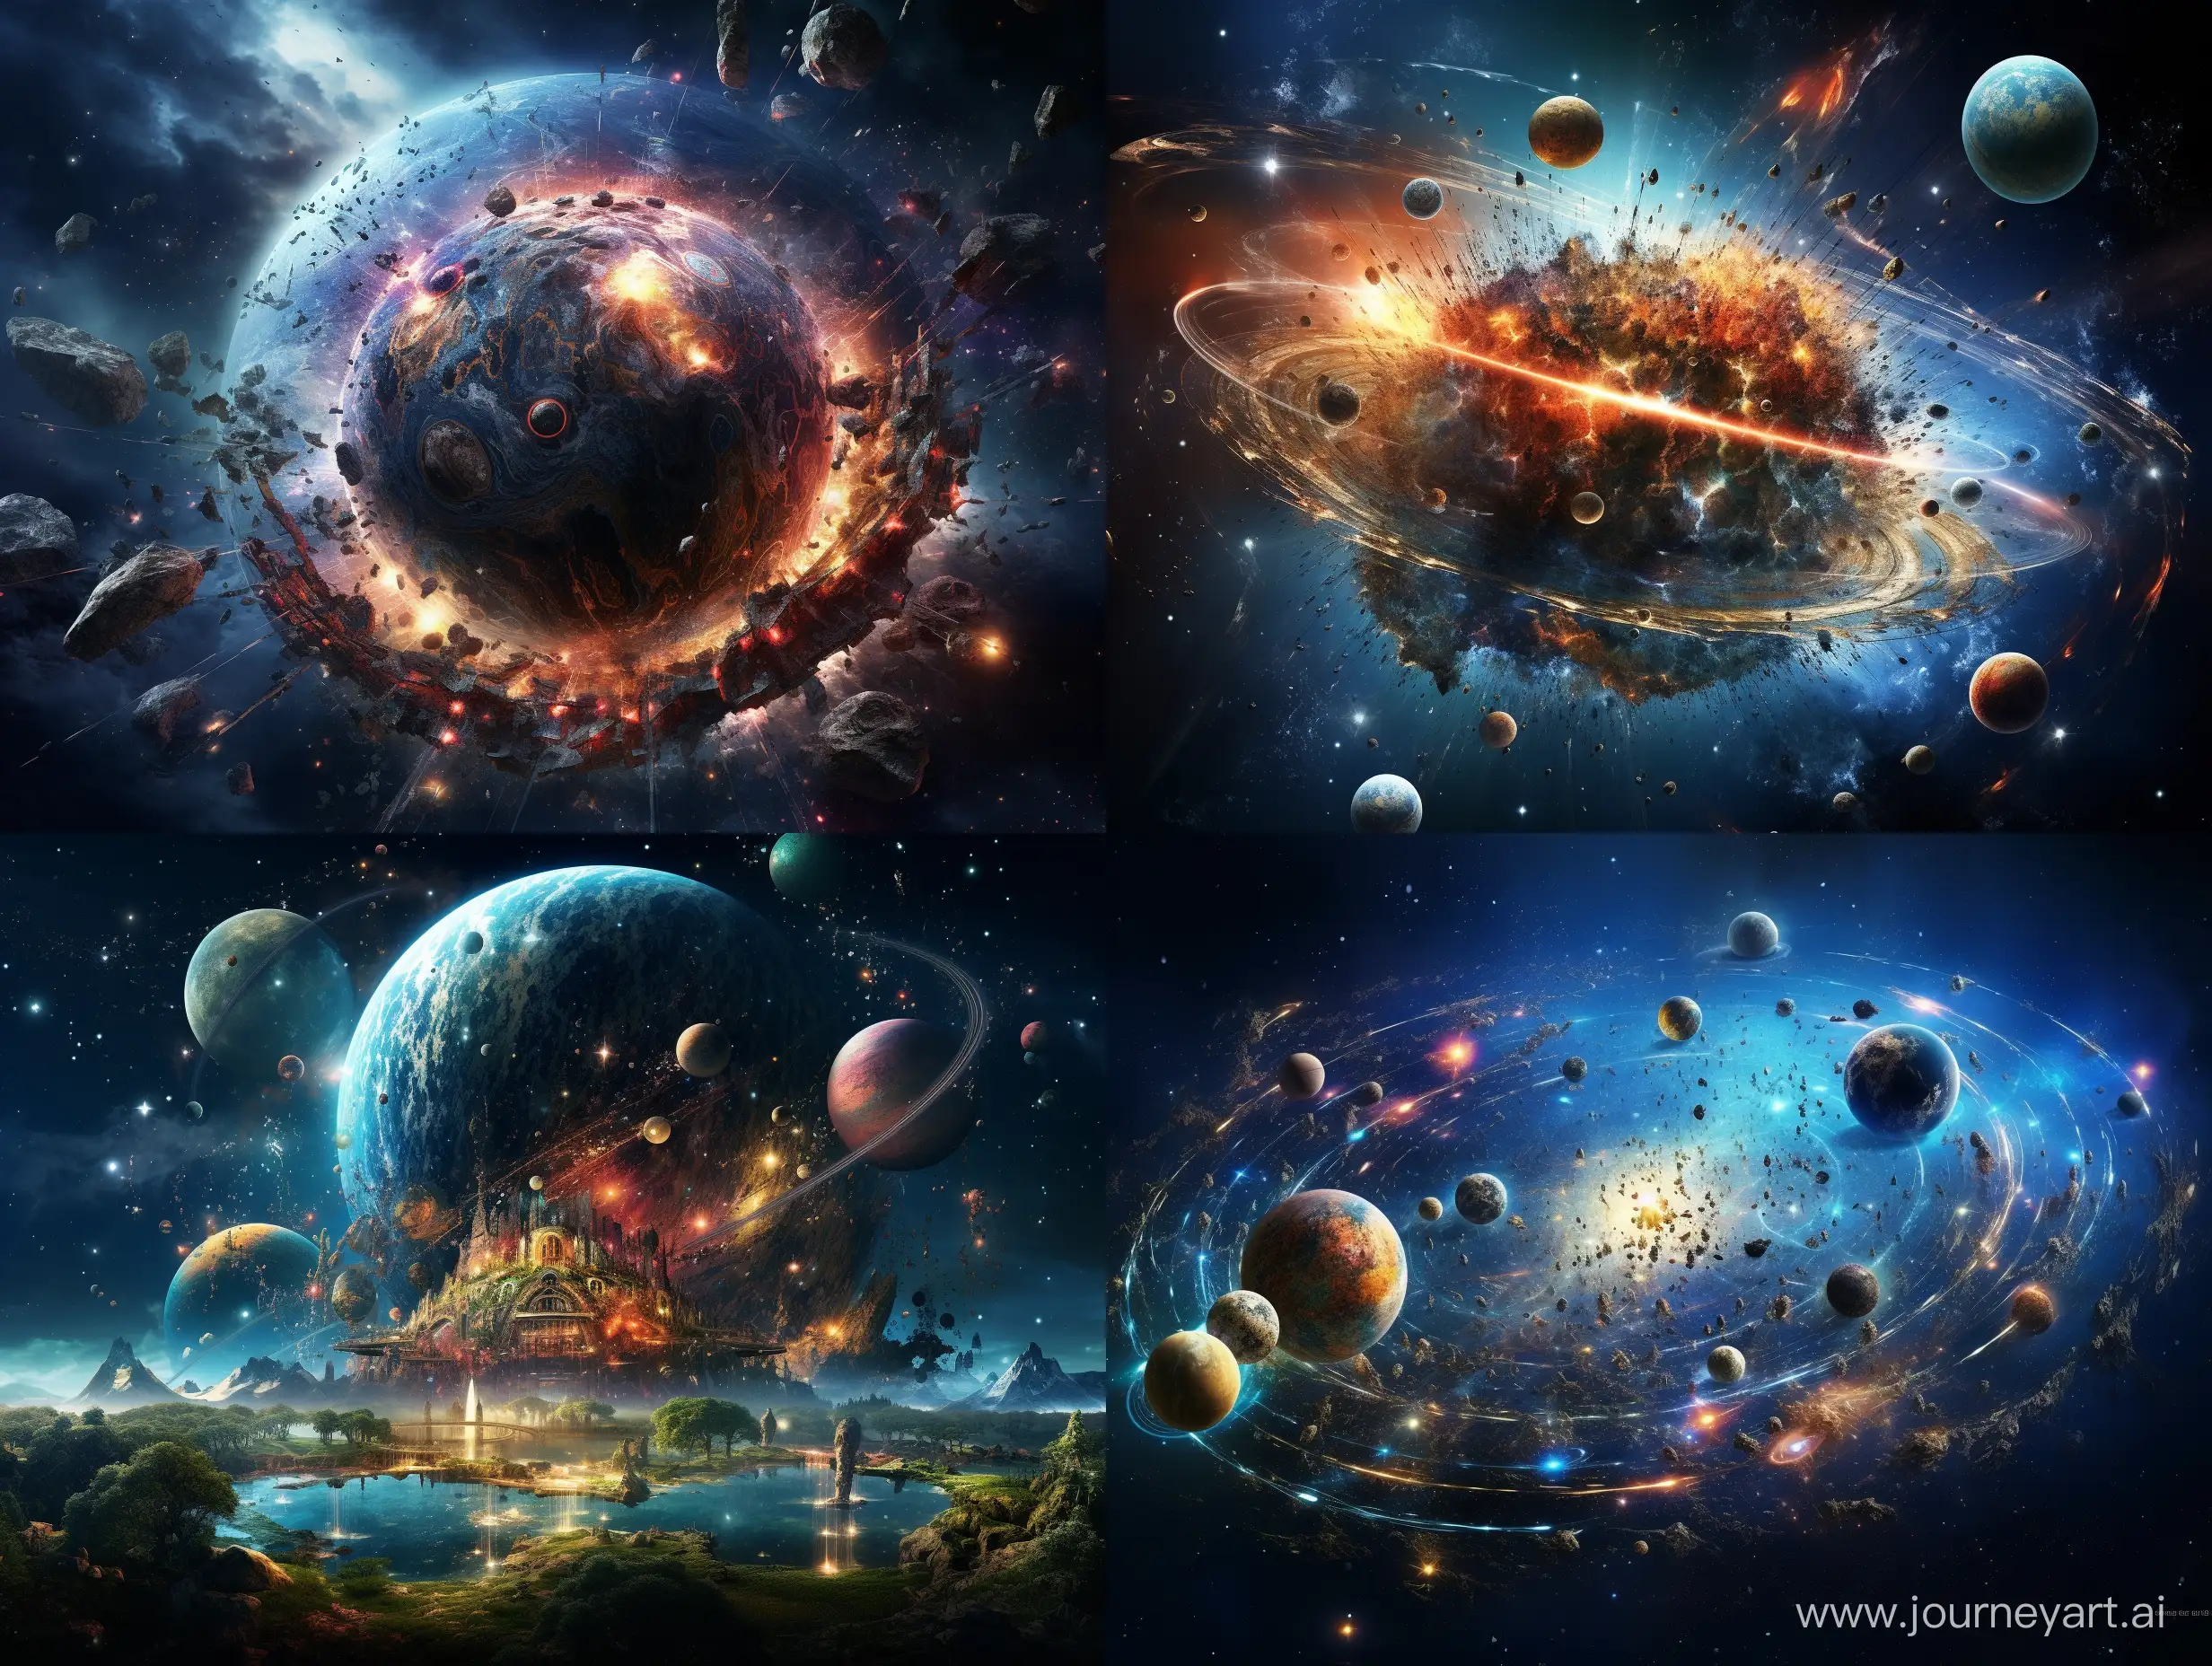 Dynamic-Evolution-of-Life-on-a-Sectioned-Space-Planet